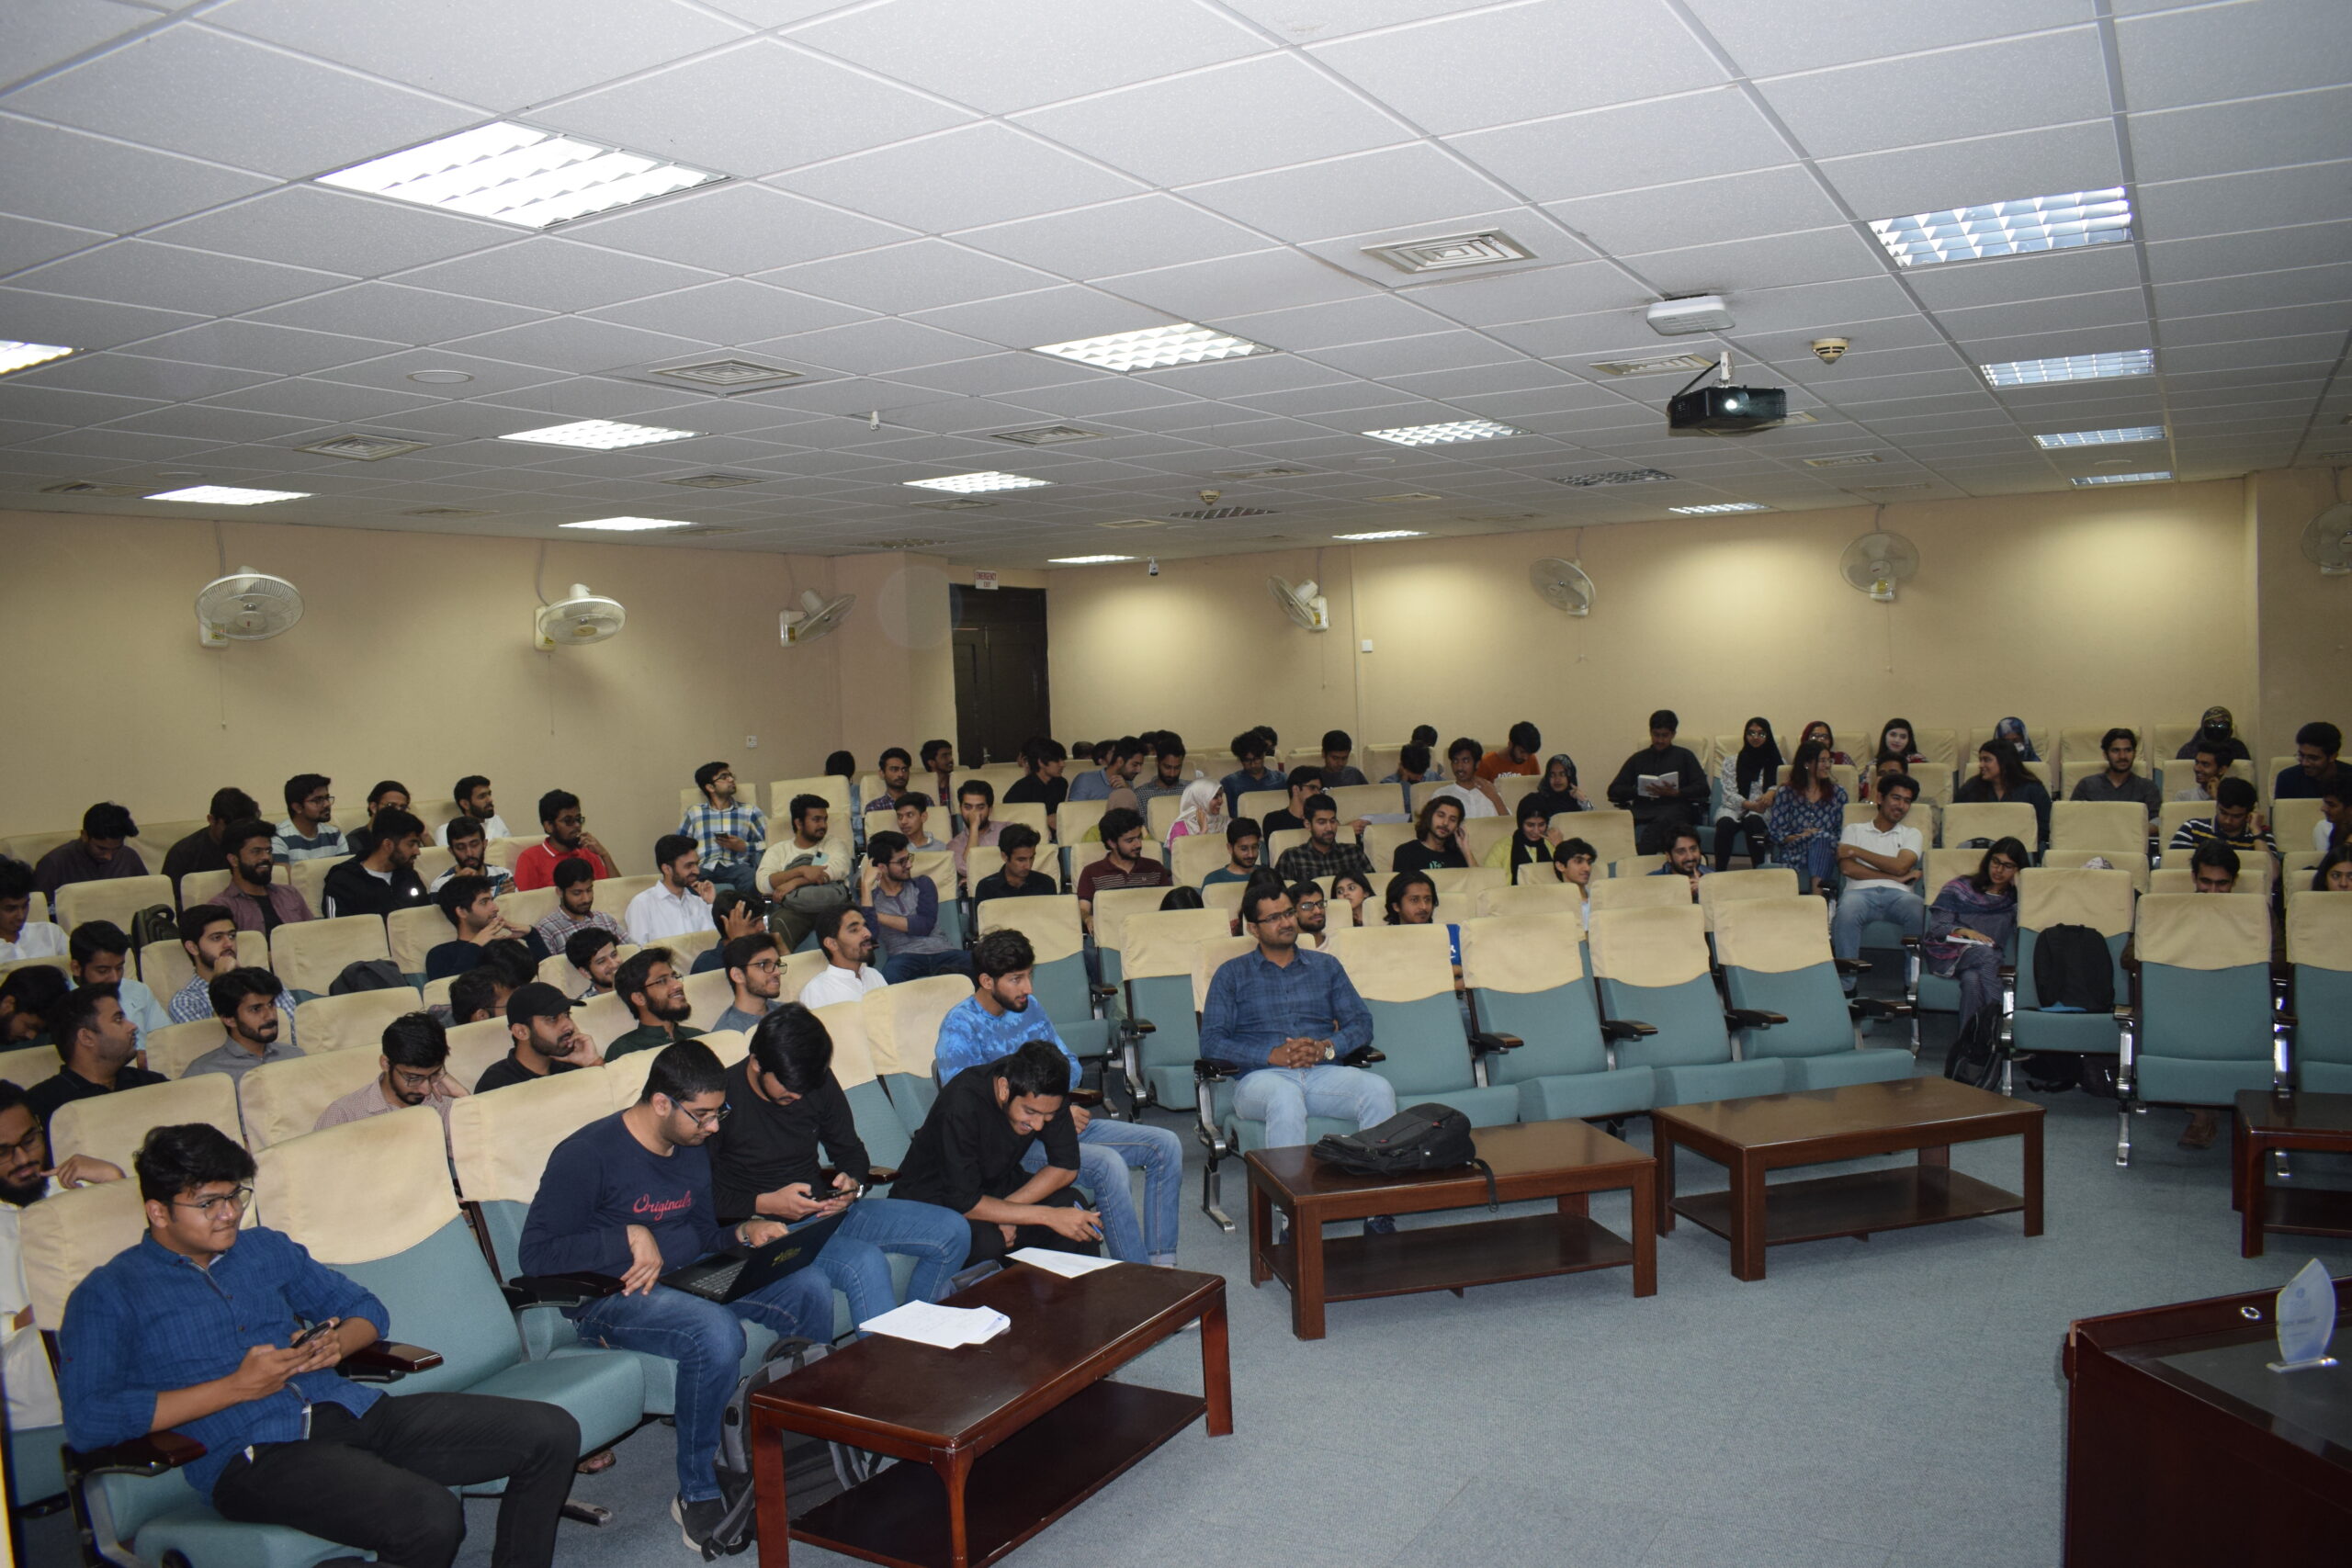 IEEE: A Promising Platform - NUST School of Electrical Engineering and Computer Science